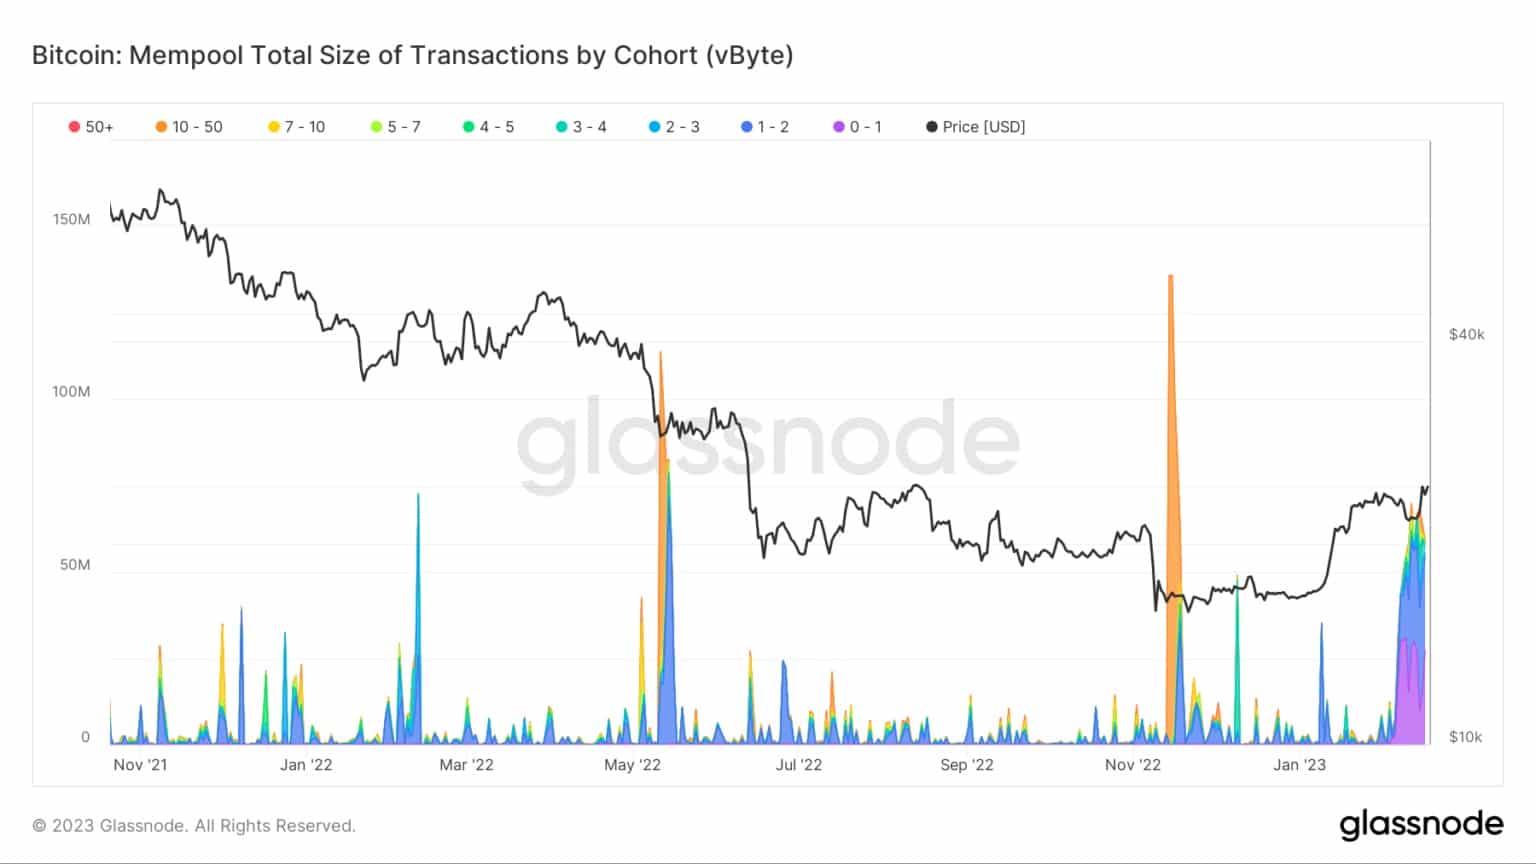 Bitcoin mempool total size of transactions by cohort (Source: Glassnode)